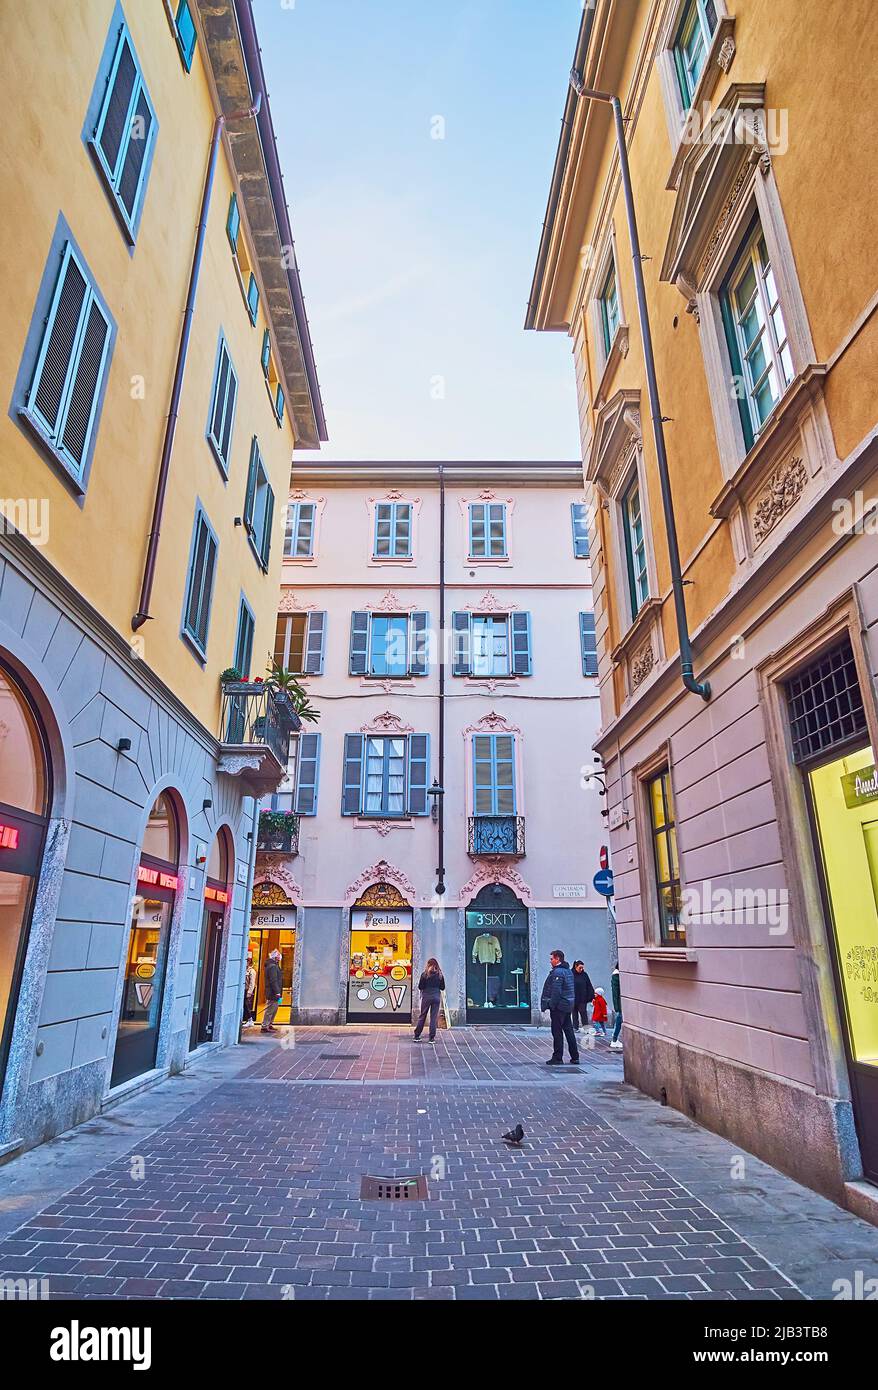 COMO, ITALY - MARCH 20, 2022: Walk old town streets and enjoy histroic architecture, tourist shops, brand boutiques and small cafes, on March 20 in Co Stock Photo